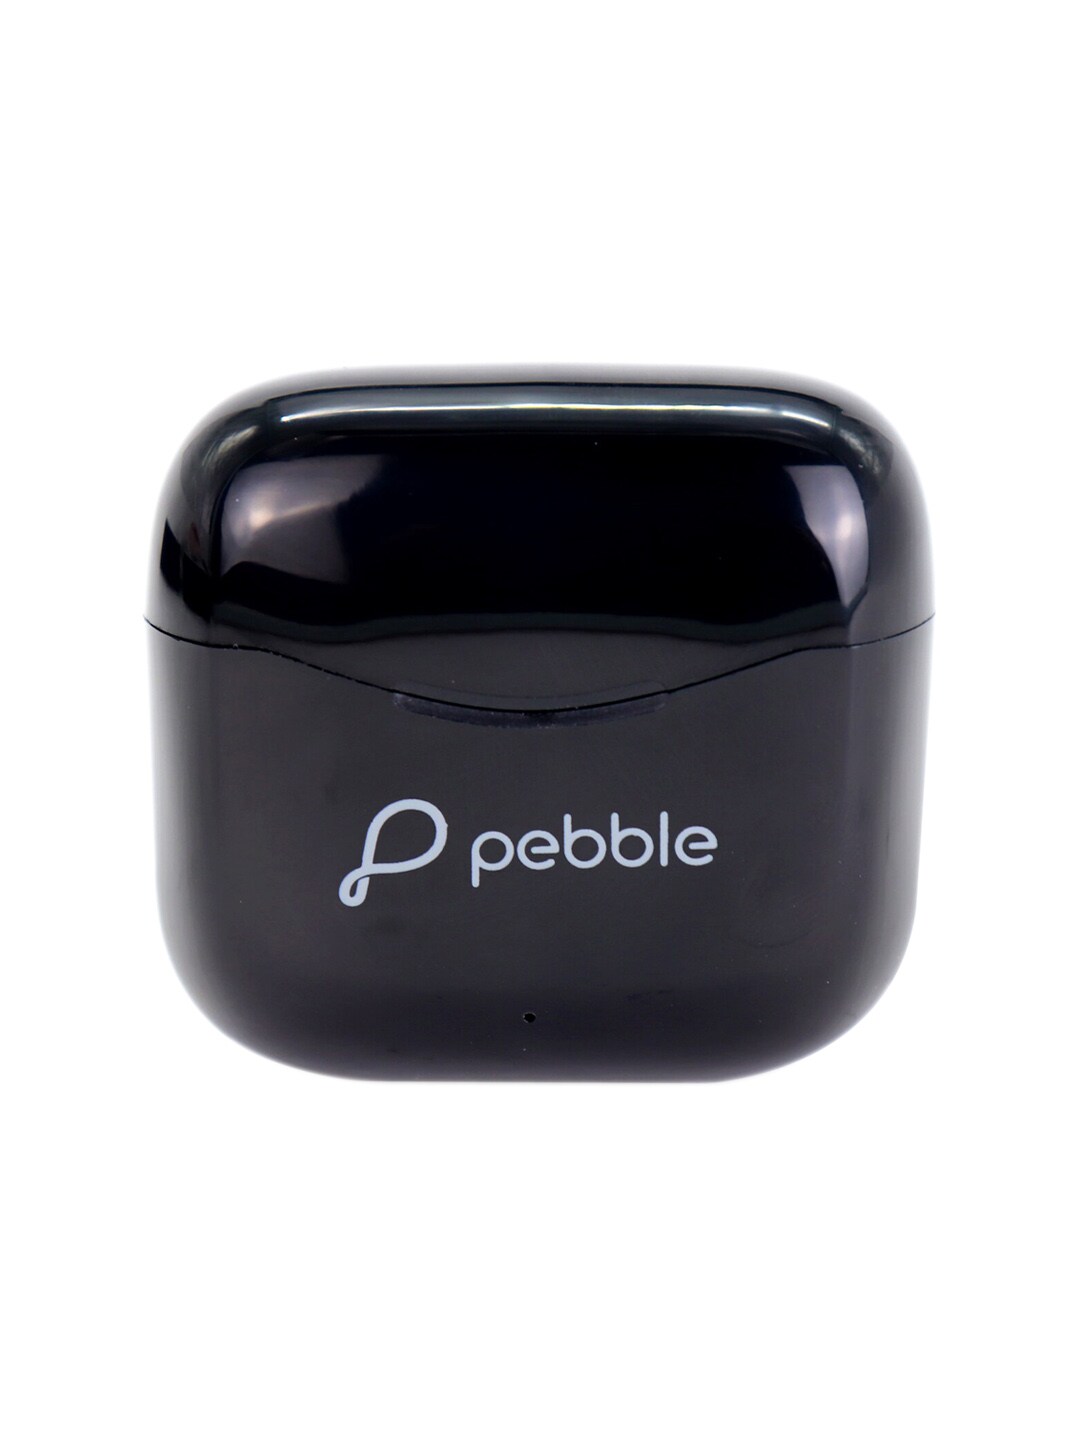 pebble Black Neo Buds True Wireless Earbuds with 20 Hours Play Time Price in India